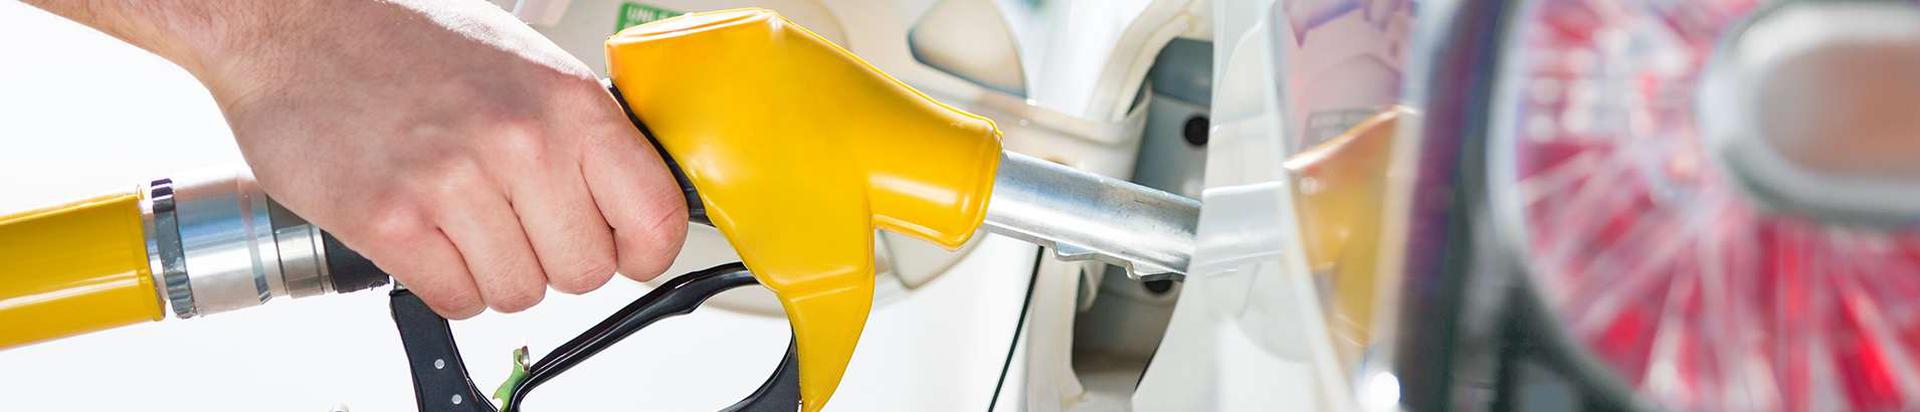 gas stations and filling stations, Energy and Mineral Resources, fuels, mineral resources and raw materials, Oil and distillates, Lead-free petrol, Diesel (EN 590), Heating oils, Lubricating oils and lubricants, Construction work for filling stations